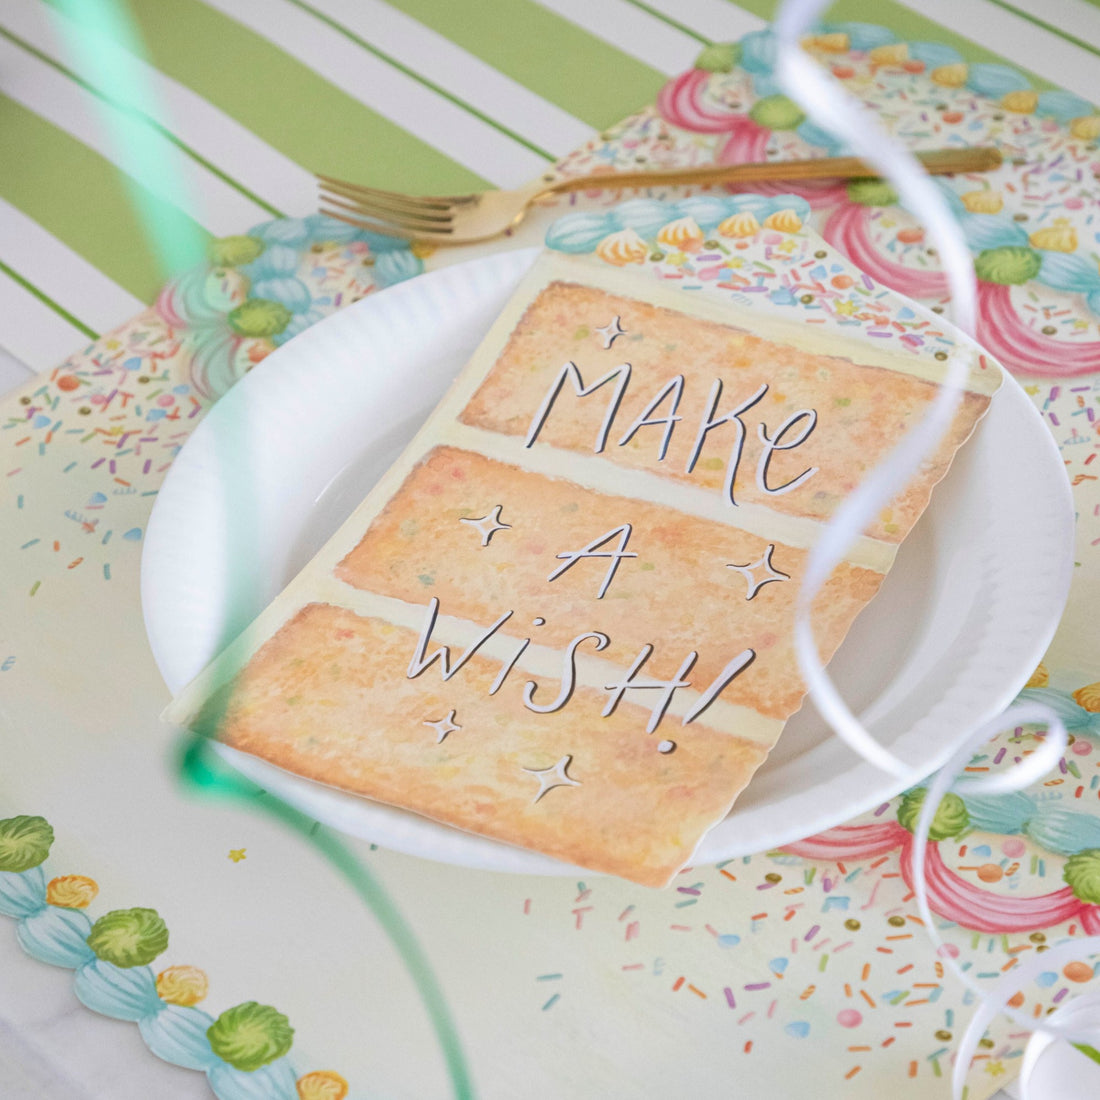 A vibrant birthday party place setting featuring a Cake Slice Table Accent resting on the plate with &quot;Make A Wish!&quot; written in white ink with a black outline.